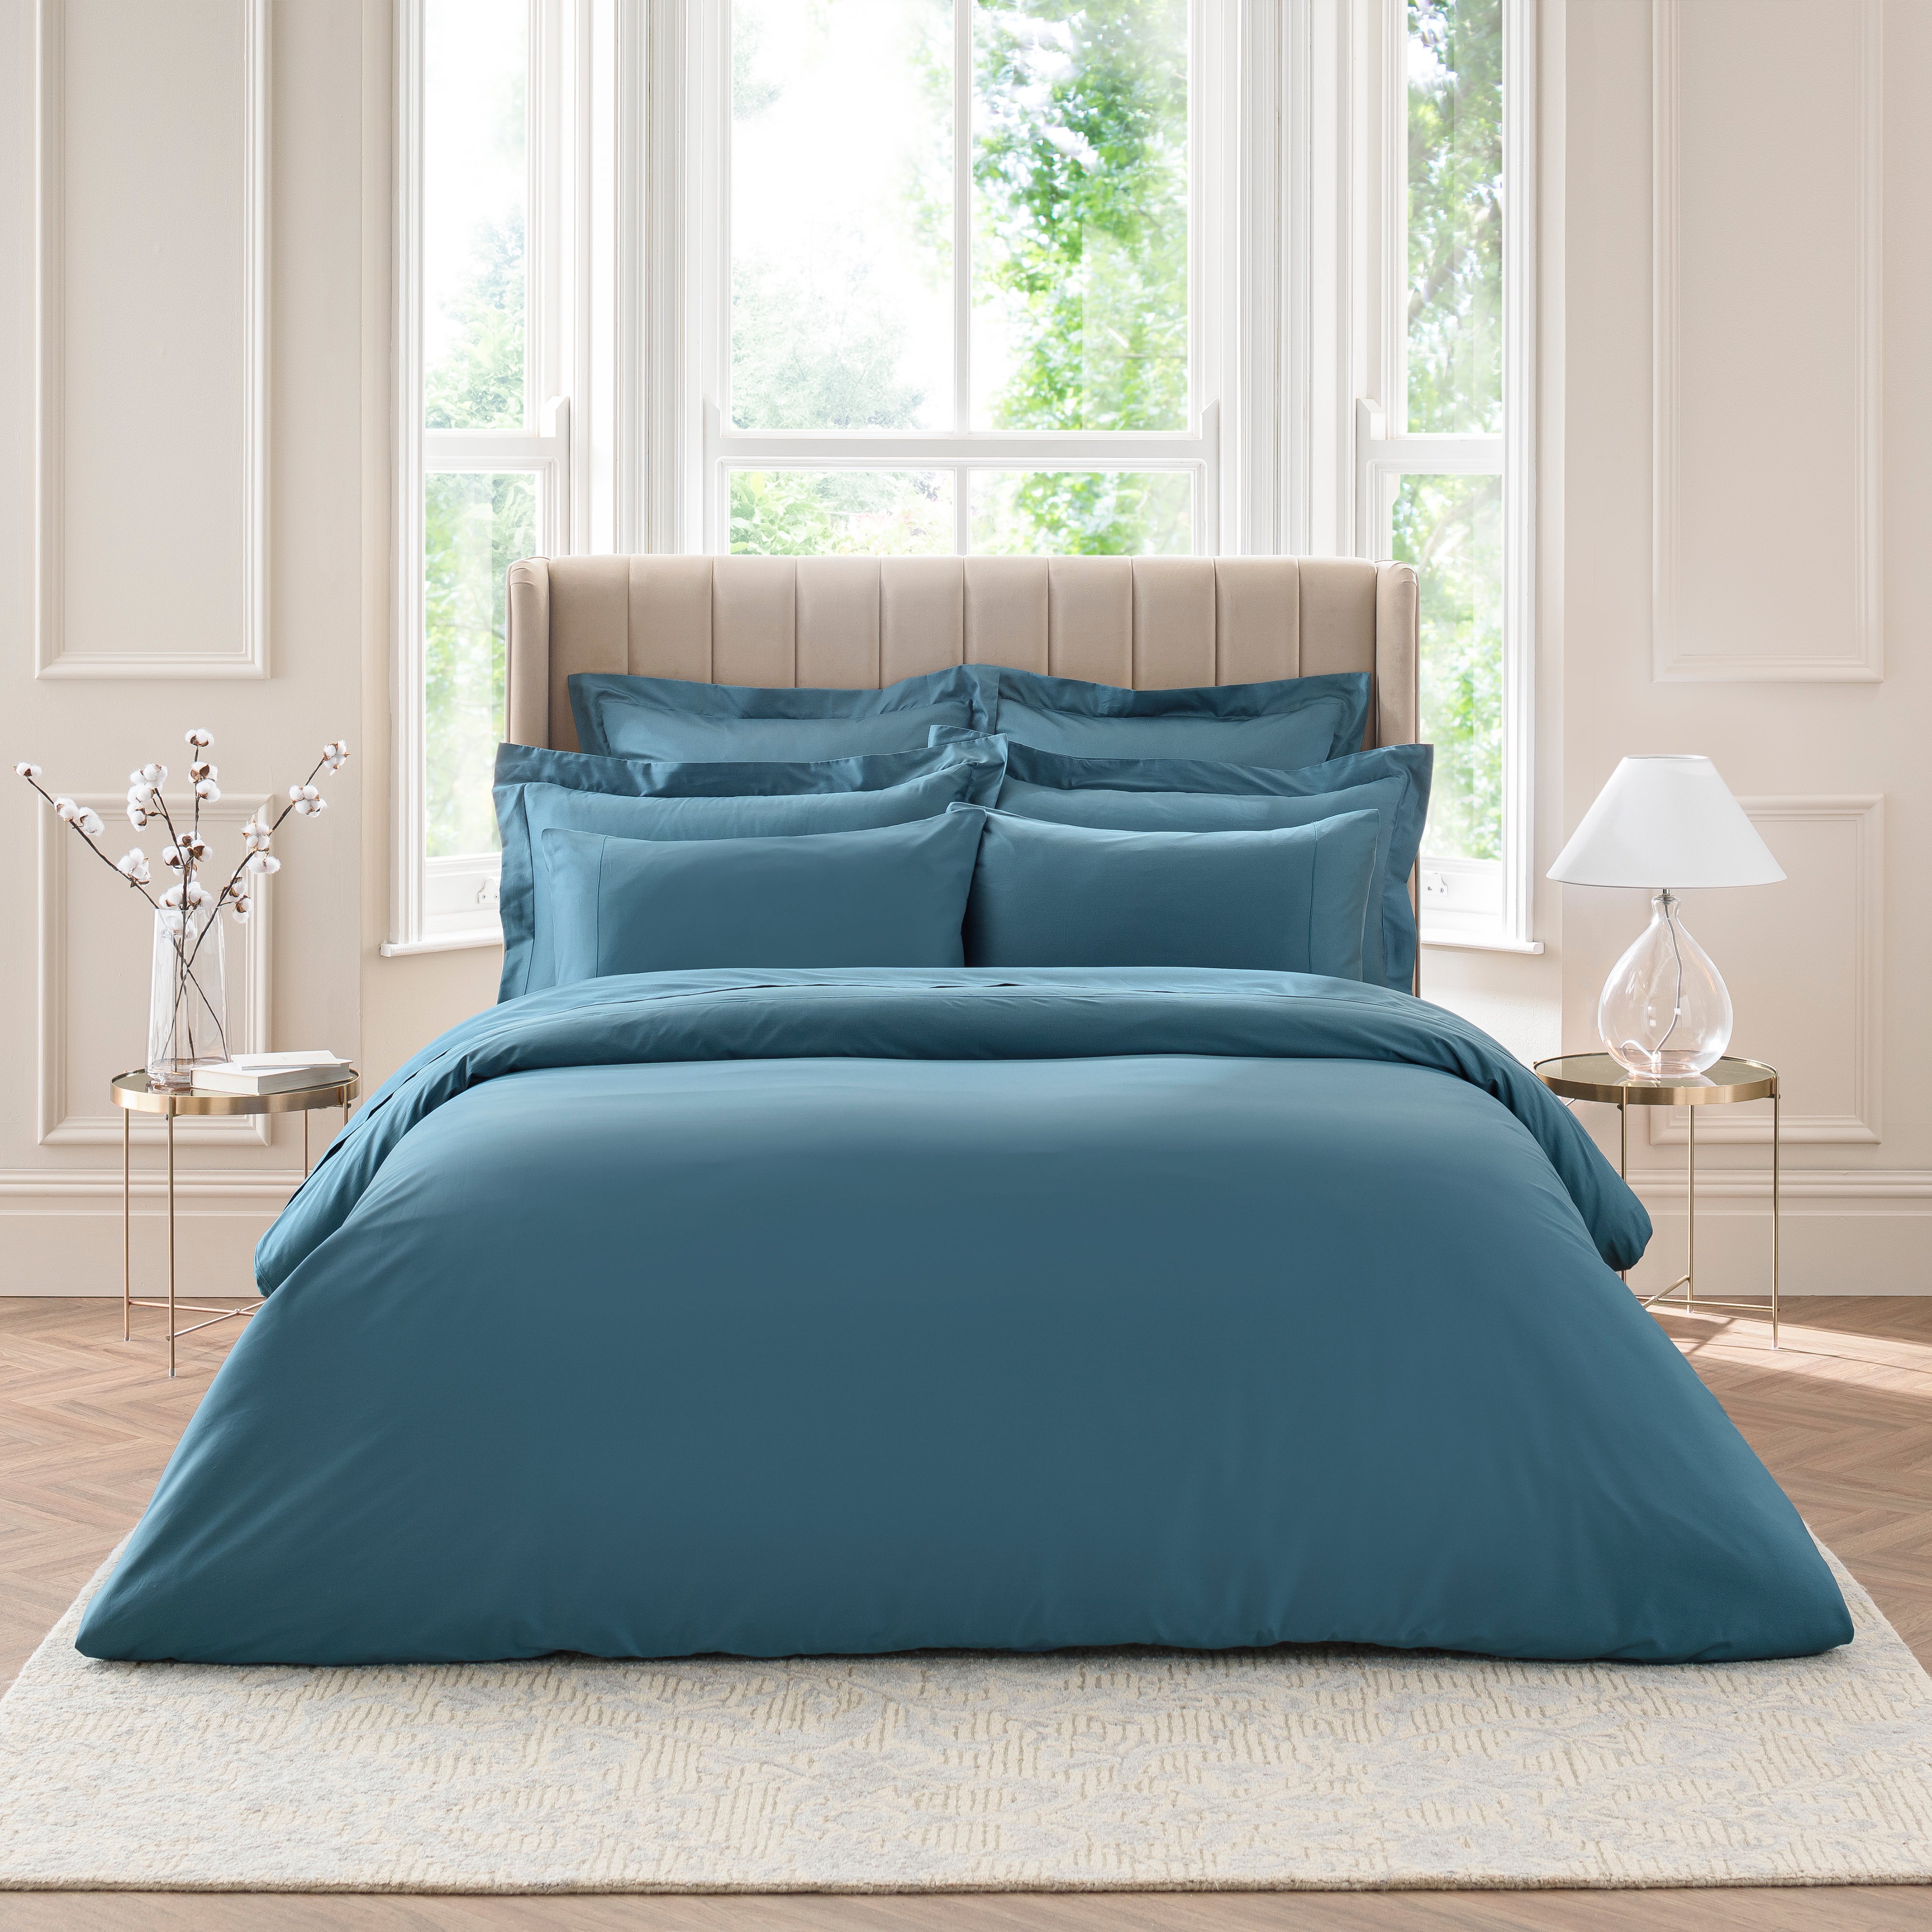 Dorma 300 Thread Count 100% Cotton Sateen Dragonfly Teal Duvet Cover